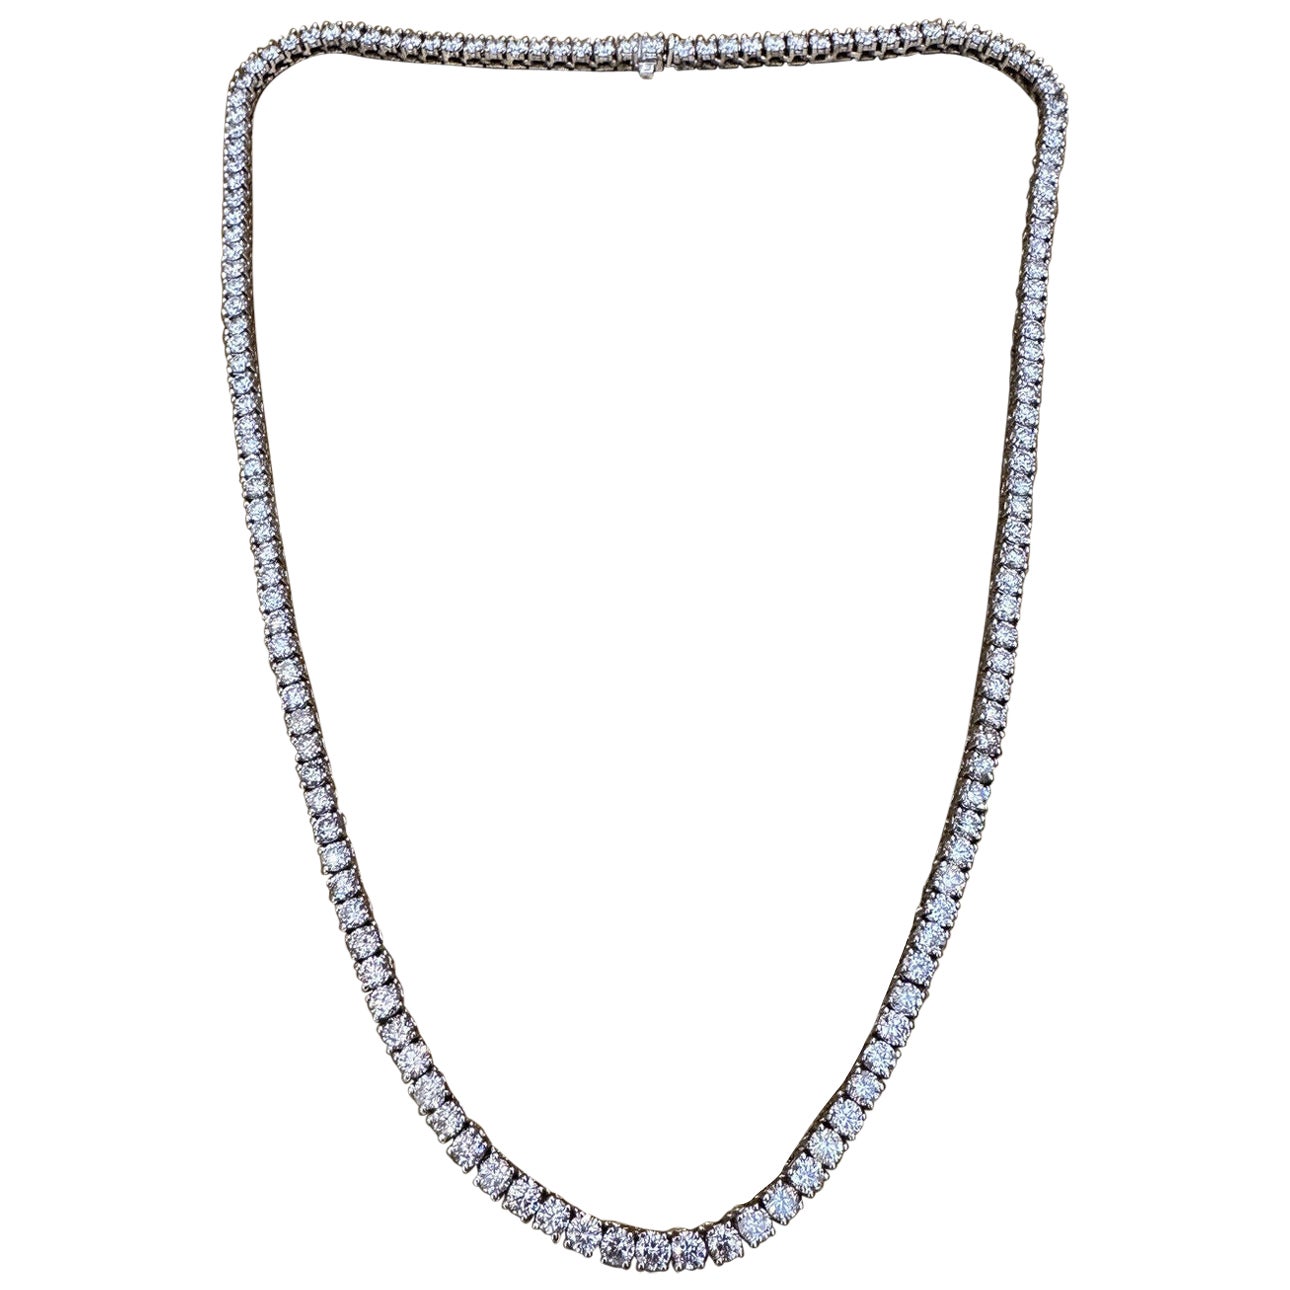 21.5" Long Diamond Tennis Riviera Necklace 24 Carats Total in 14k White Gold